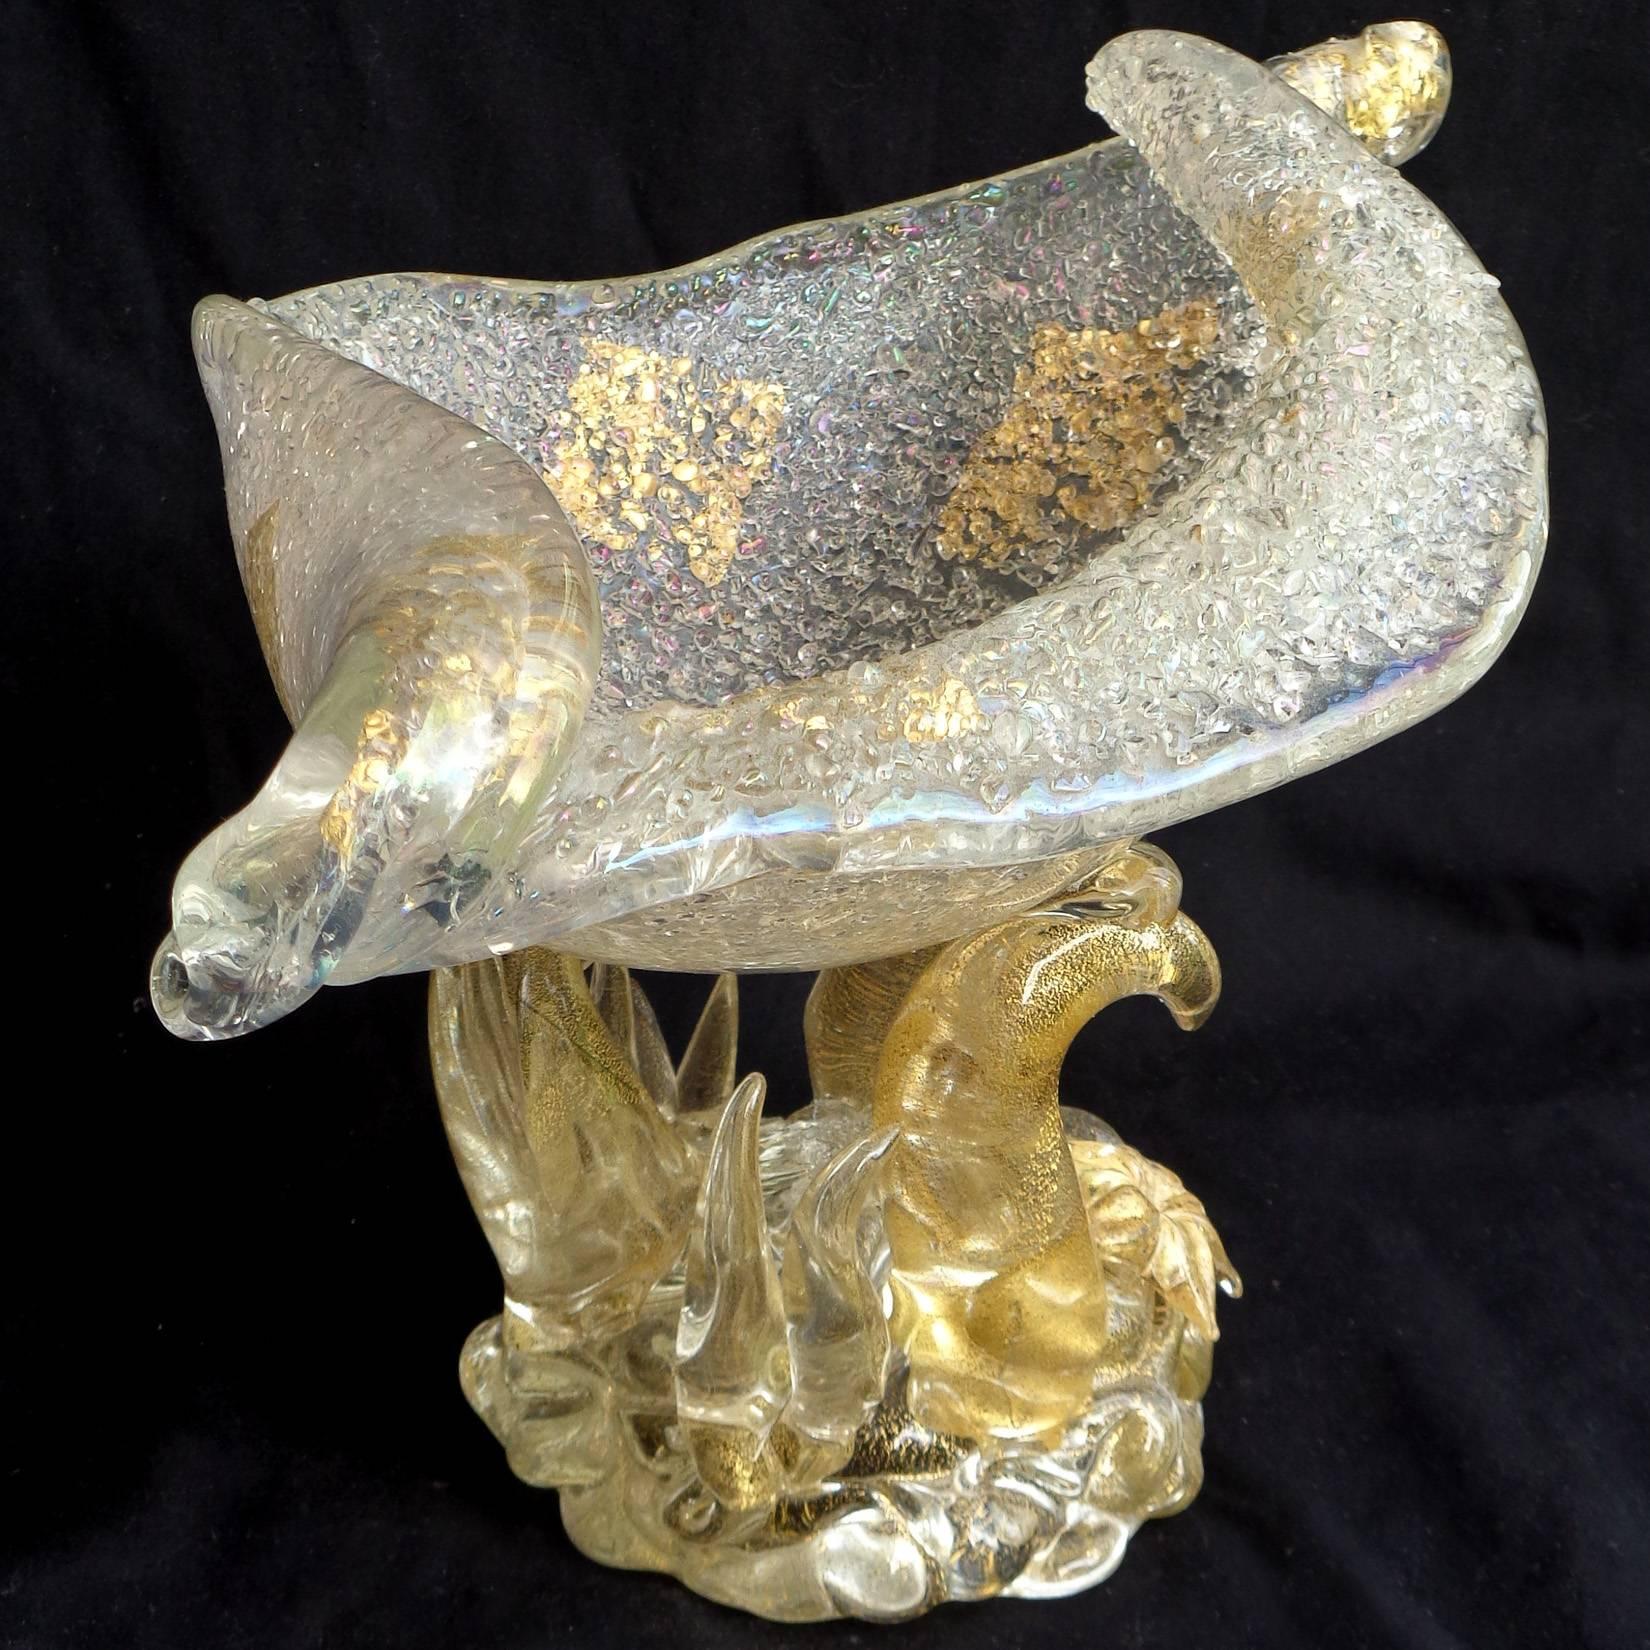 Beautiful antique Murano handblown, iridescent, gold flecks and textured Italian art glass sculptural conch shell centrepiece bowl. Documented to Ercole Barovier for Barovier e Toso, circa 1940s, in the 